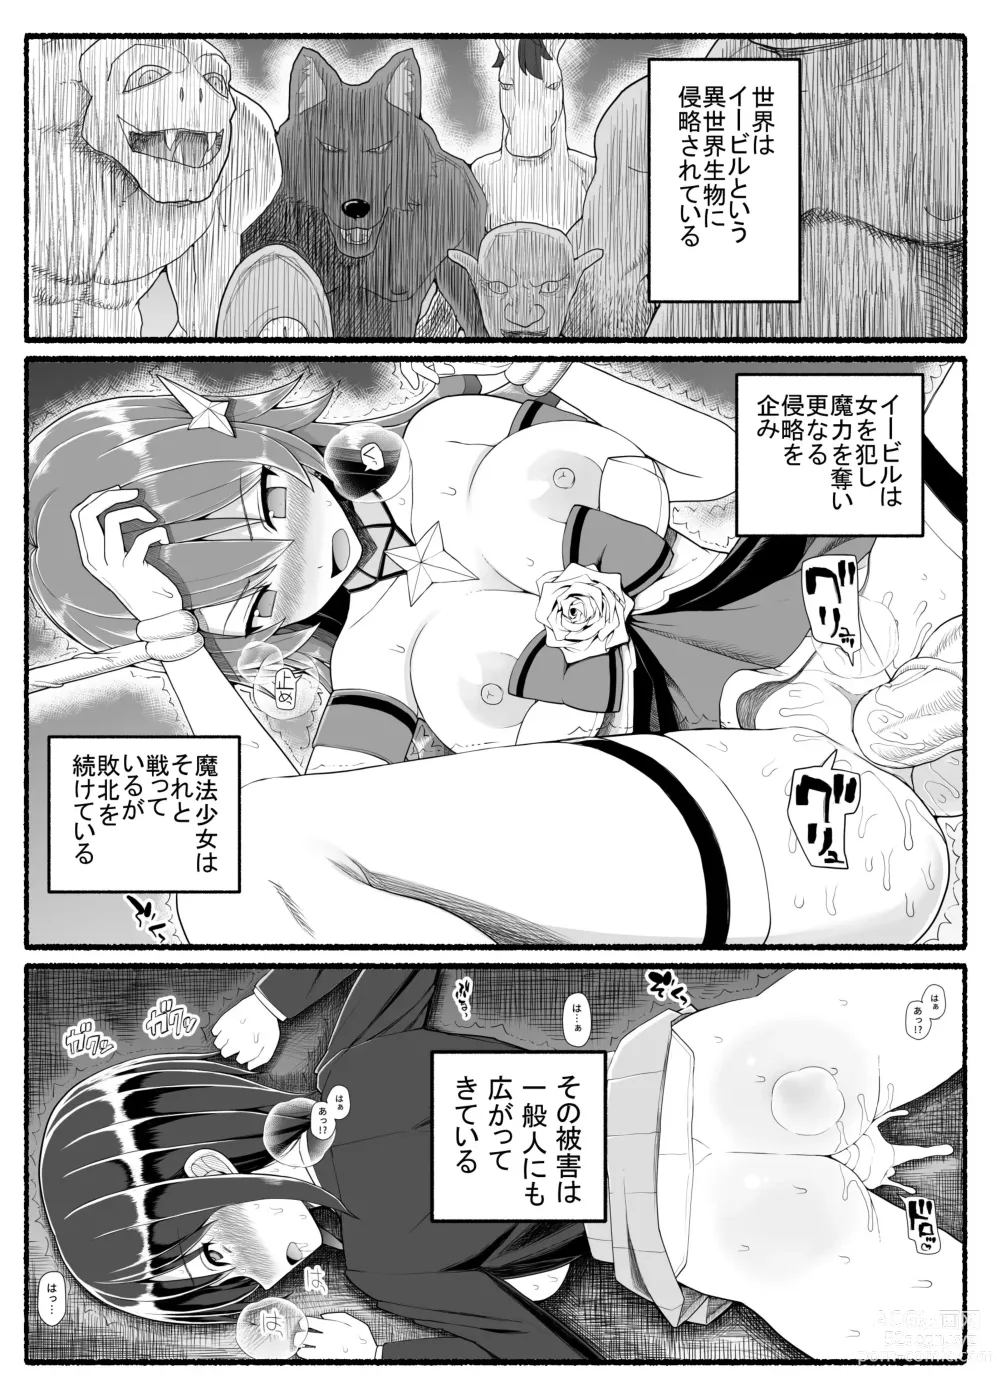 Page 2 of doujinshi Magical Girl vs. Evil Creature 22